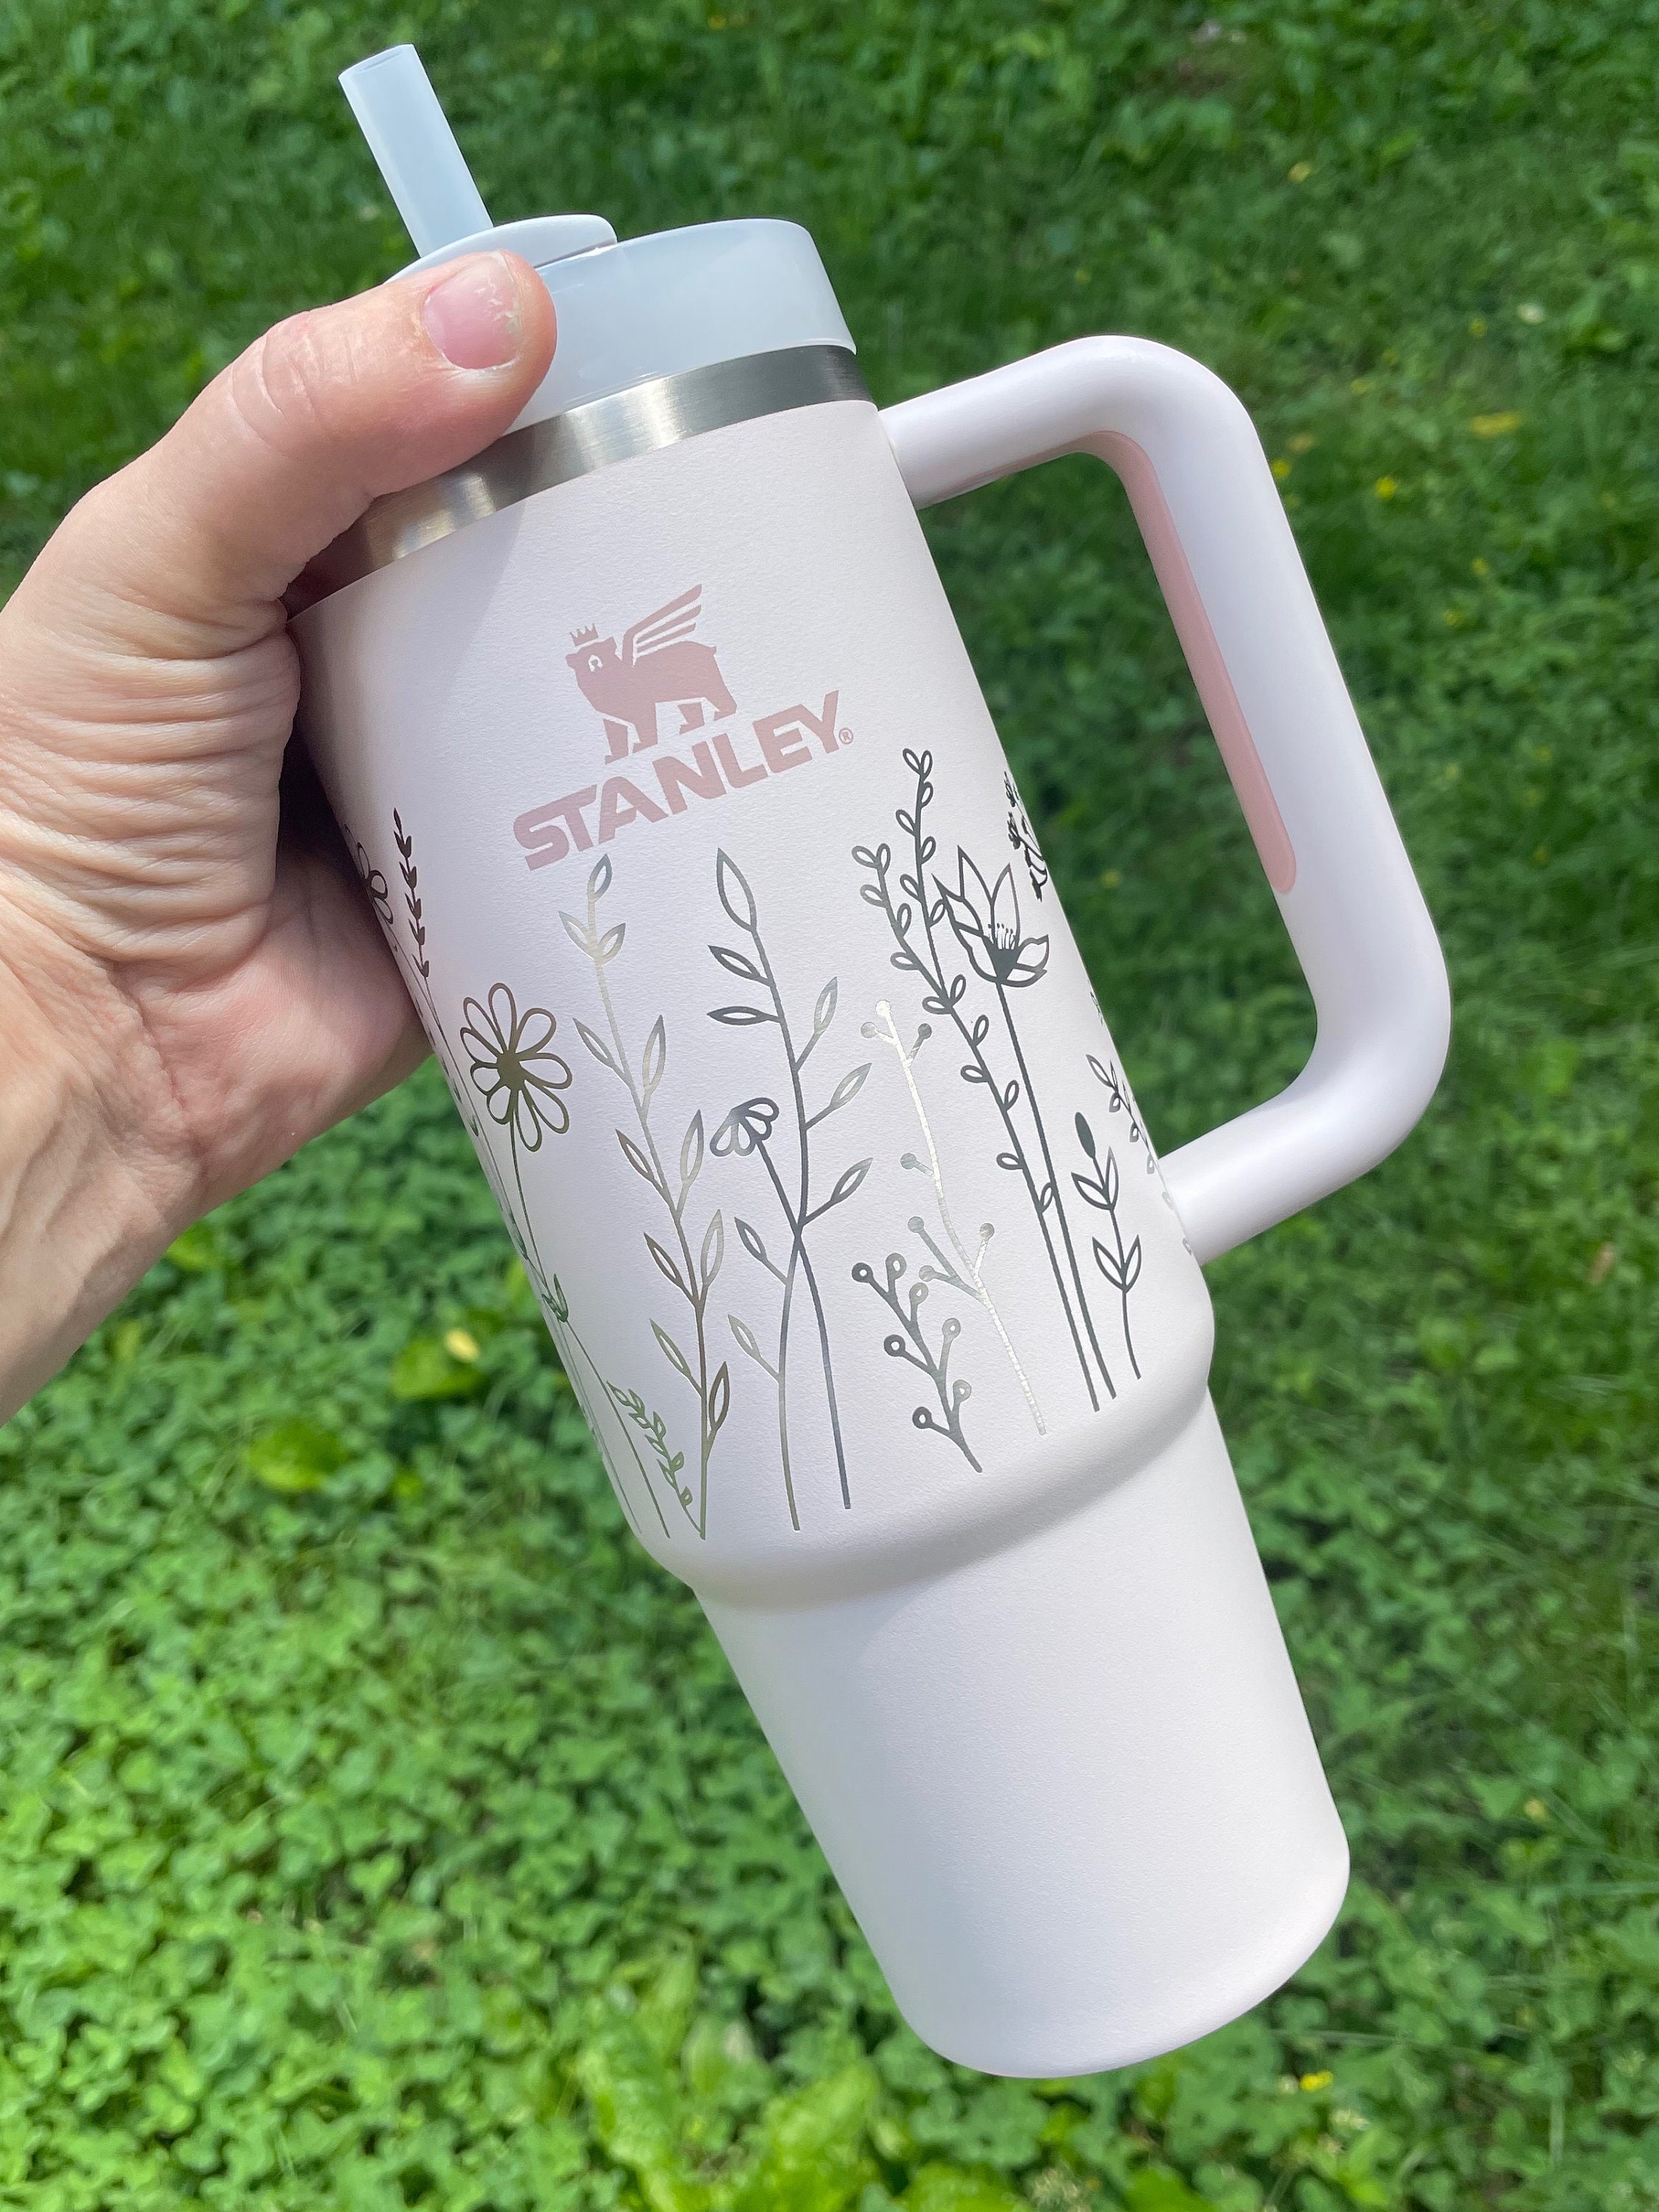 Personalized Engraved Stanley Quencher 40 Oz 30 Oz 20 Oz Dishwasher Safe  Tumbler Stanley Brand Cup With Handle Engraved NOT Stickers 